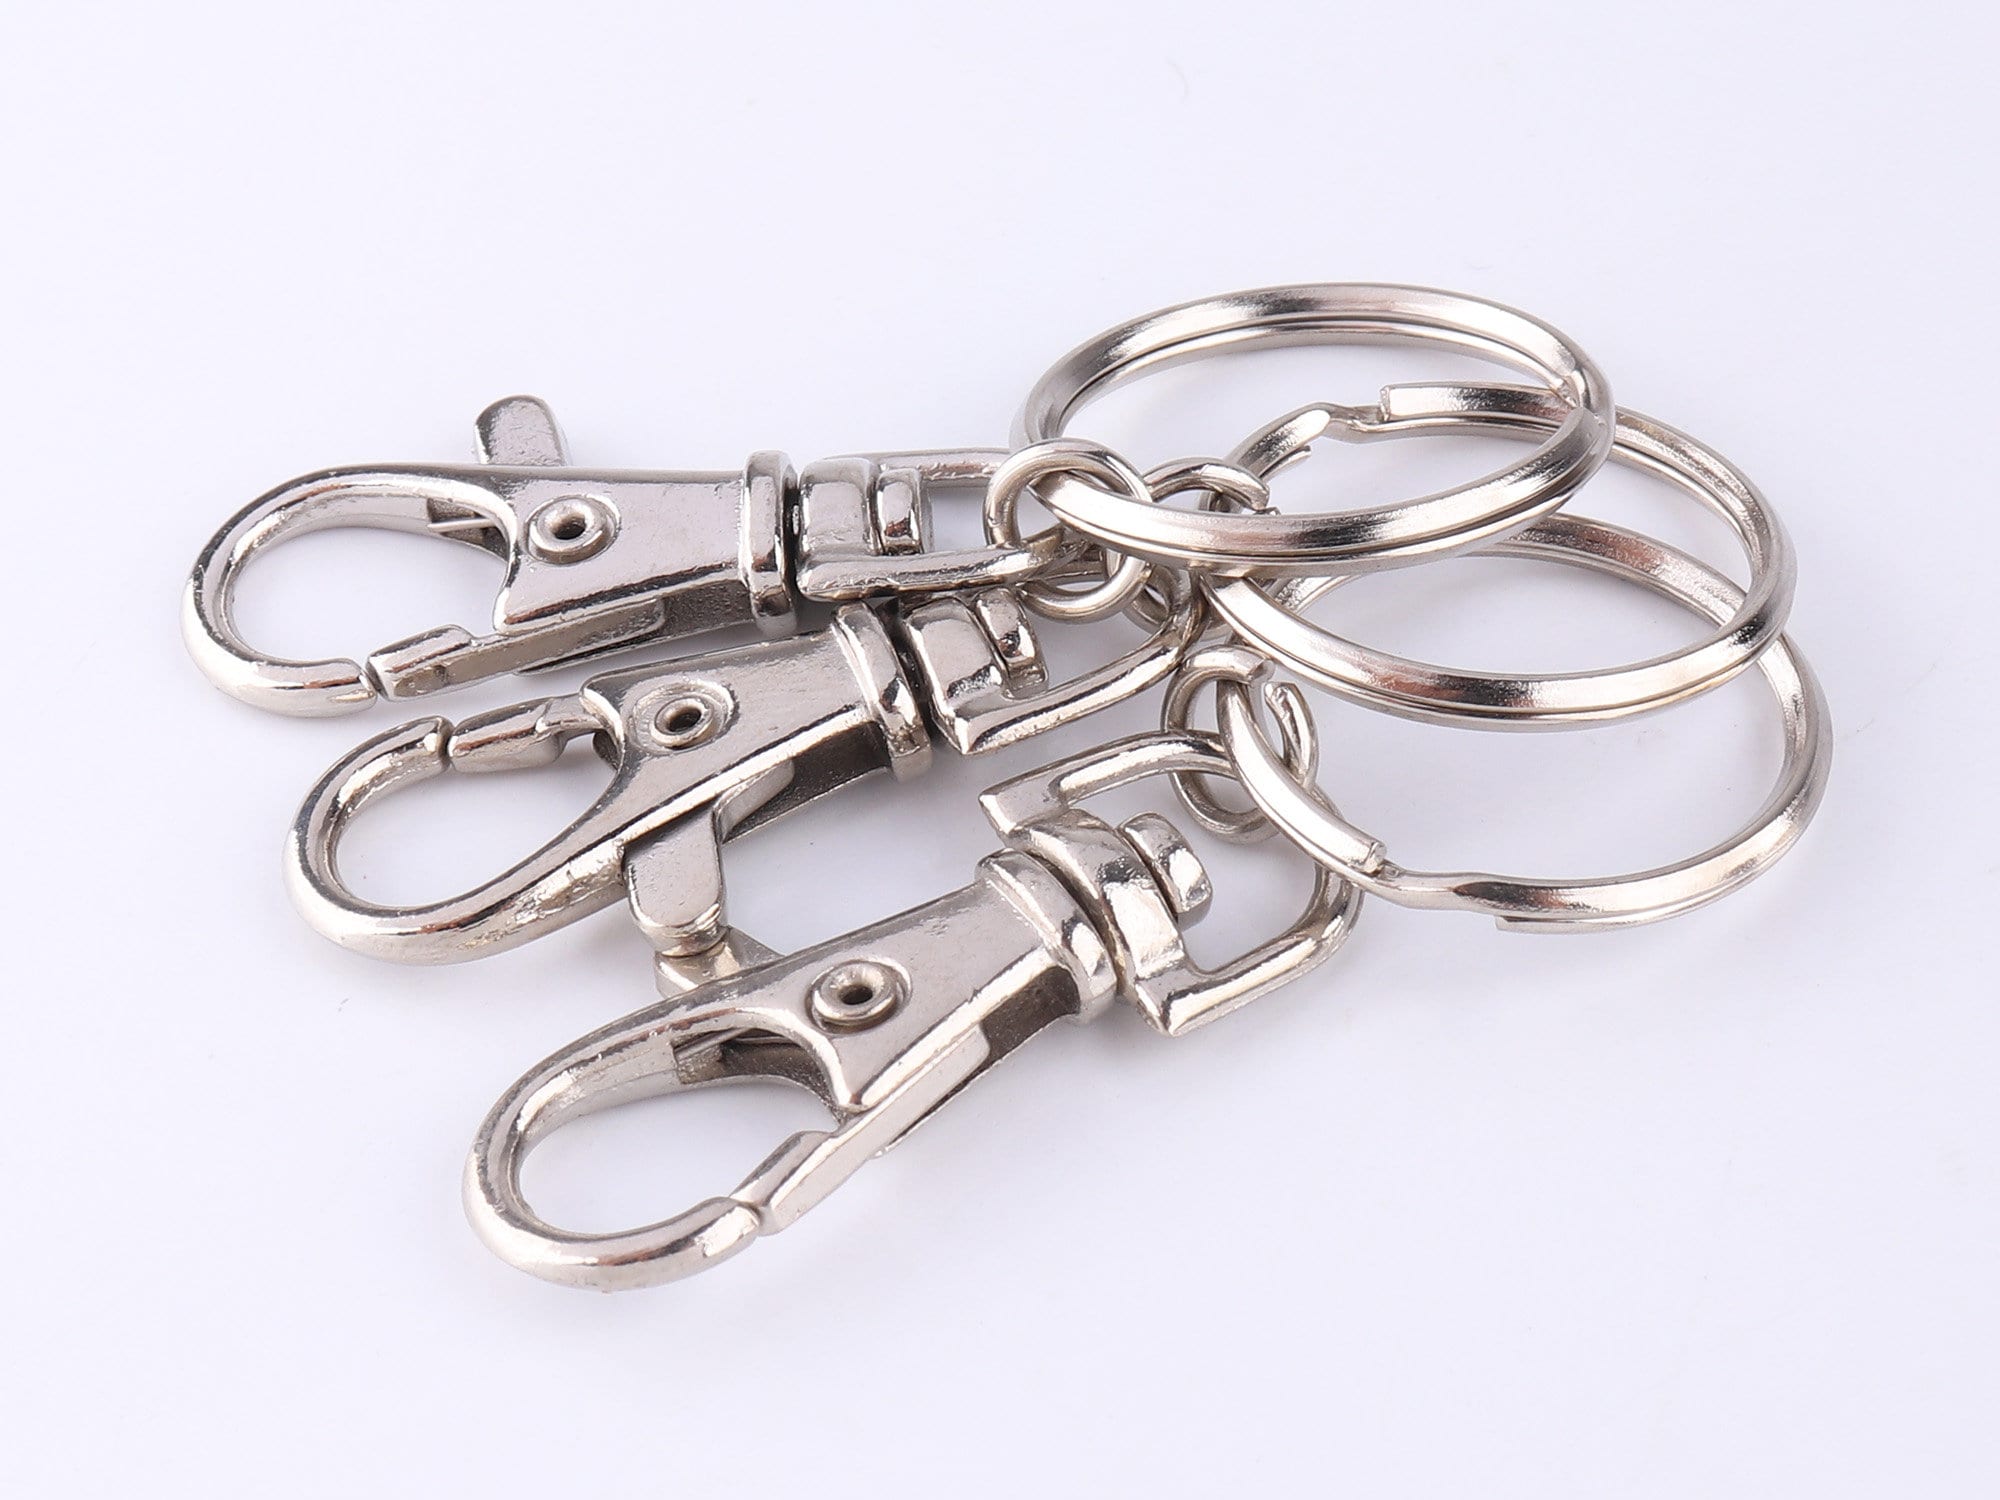 25PCS Jewelry Repair Kit Keychain Lobster Clasp Lobster Clasp Connector